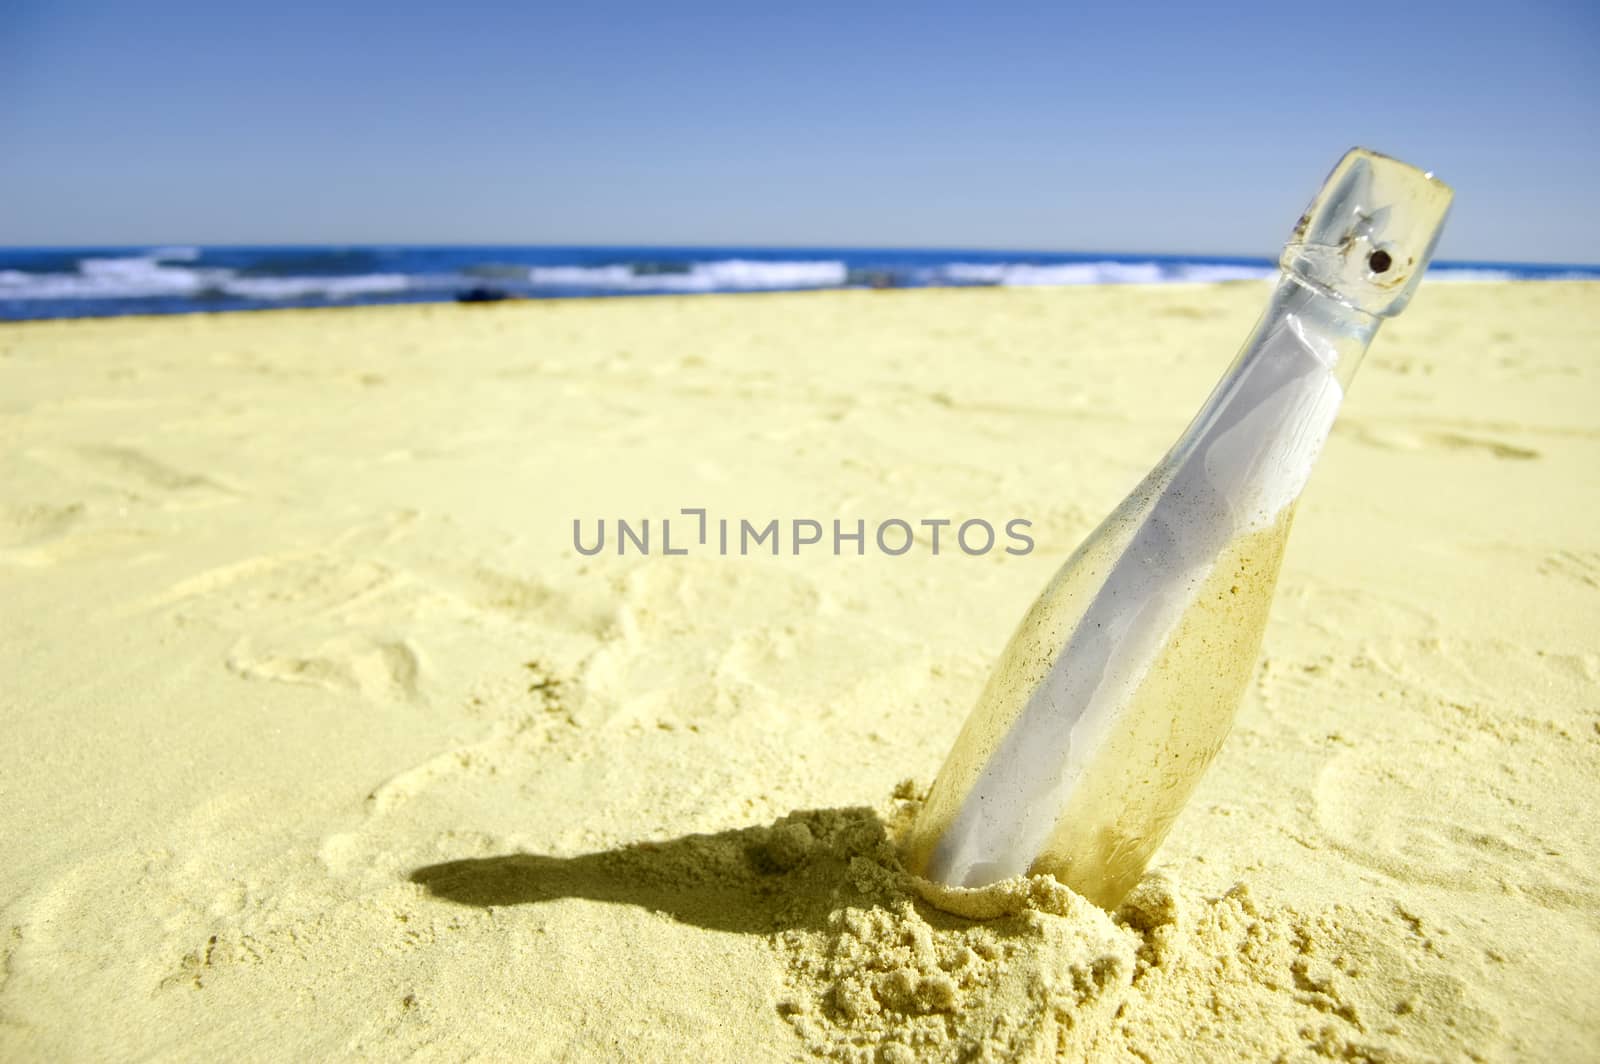 Message conceptual image. Message in a bottle on sand.